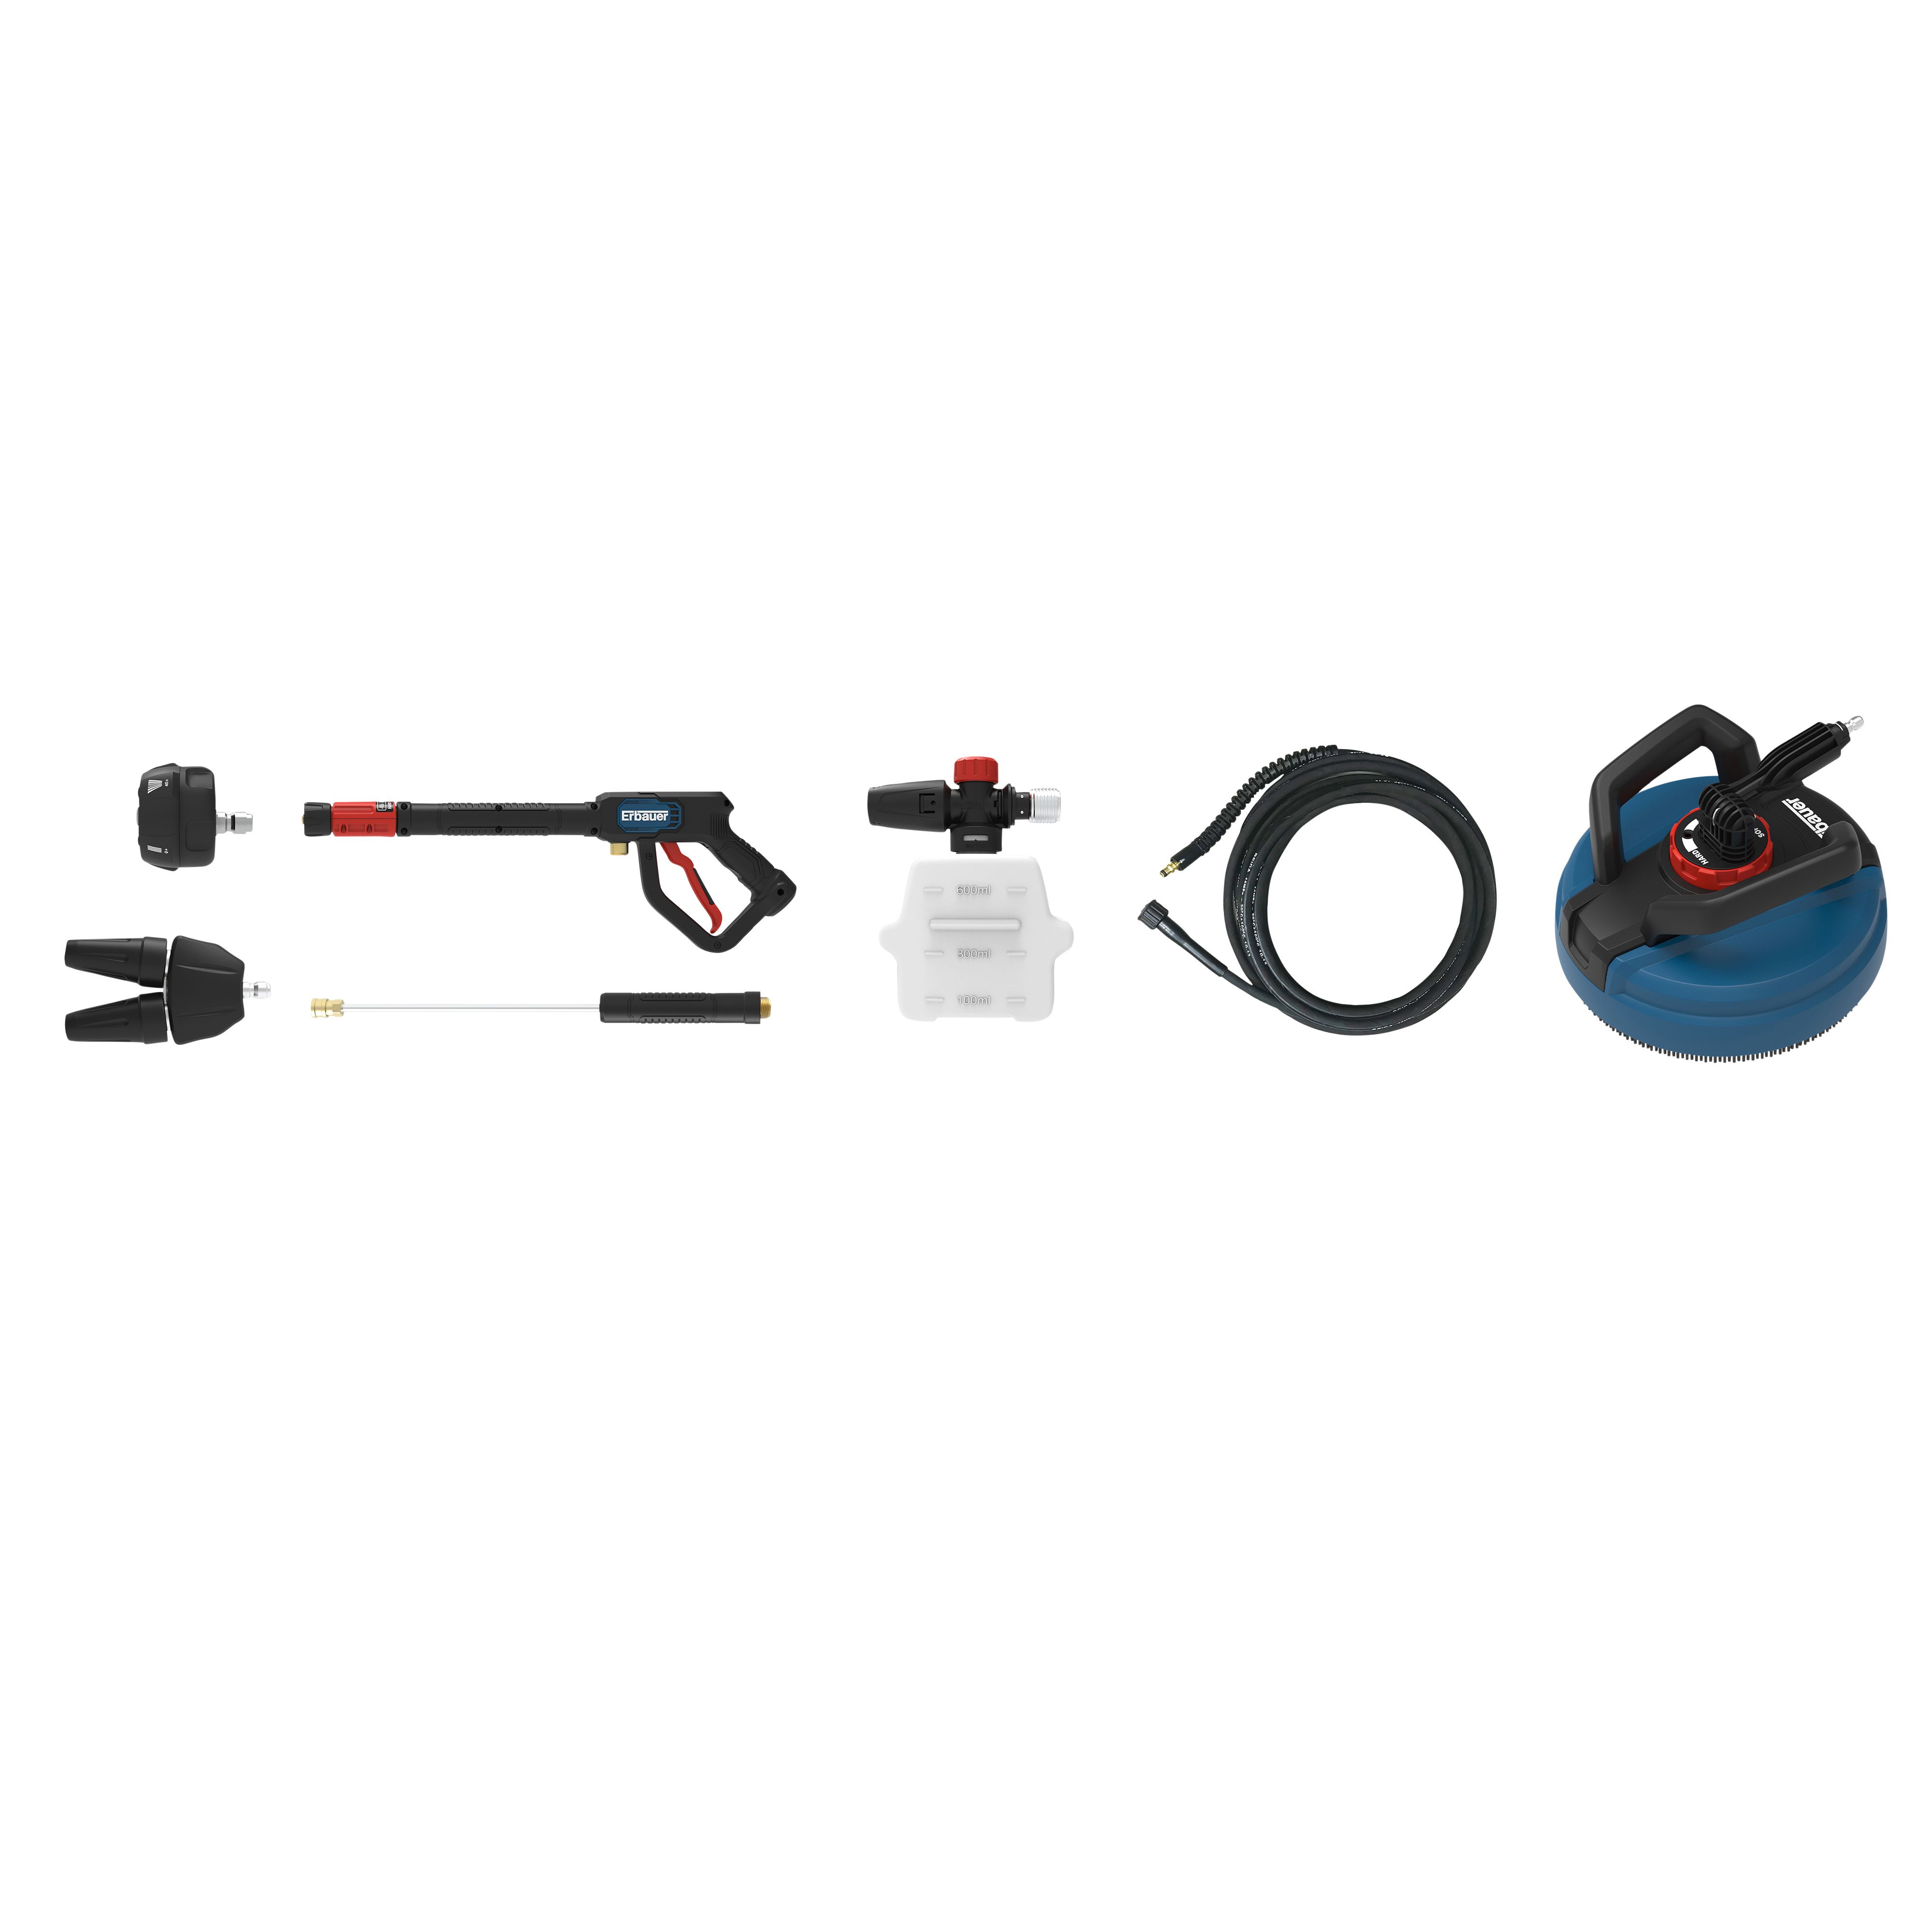 Auto-stop Corded Pressure washer 1.4kW FPHPC100